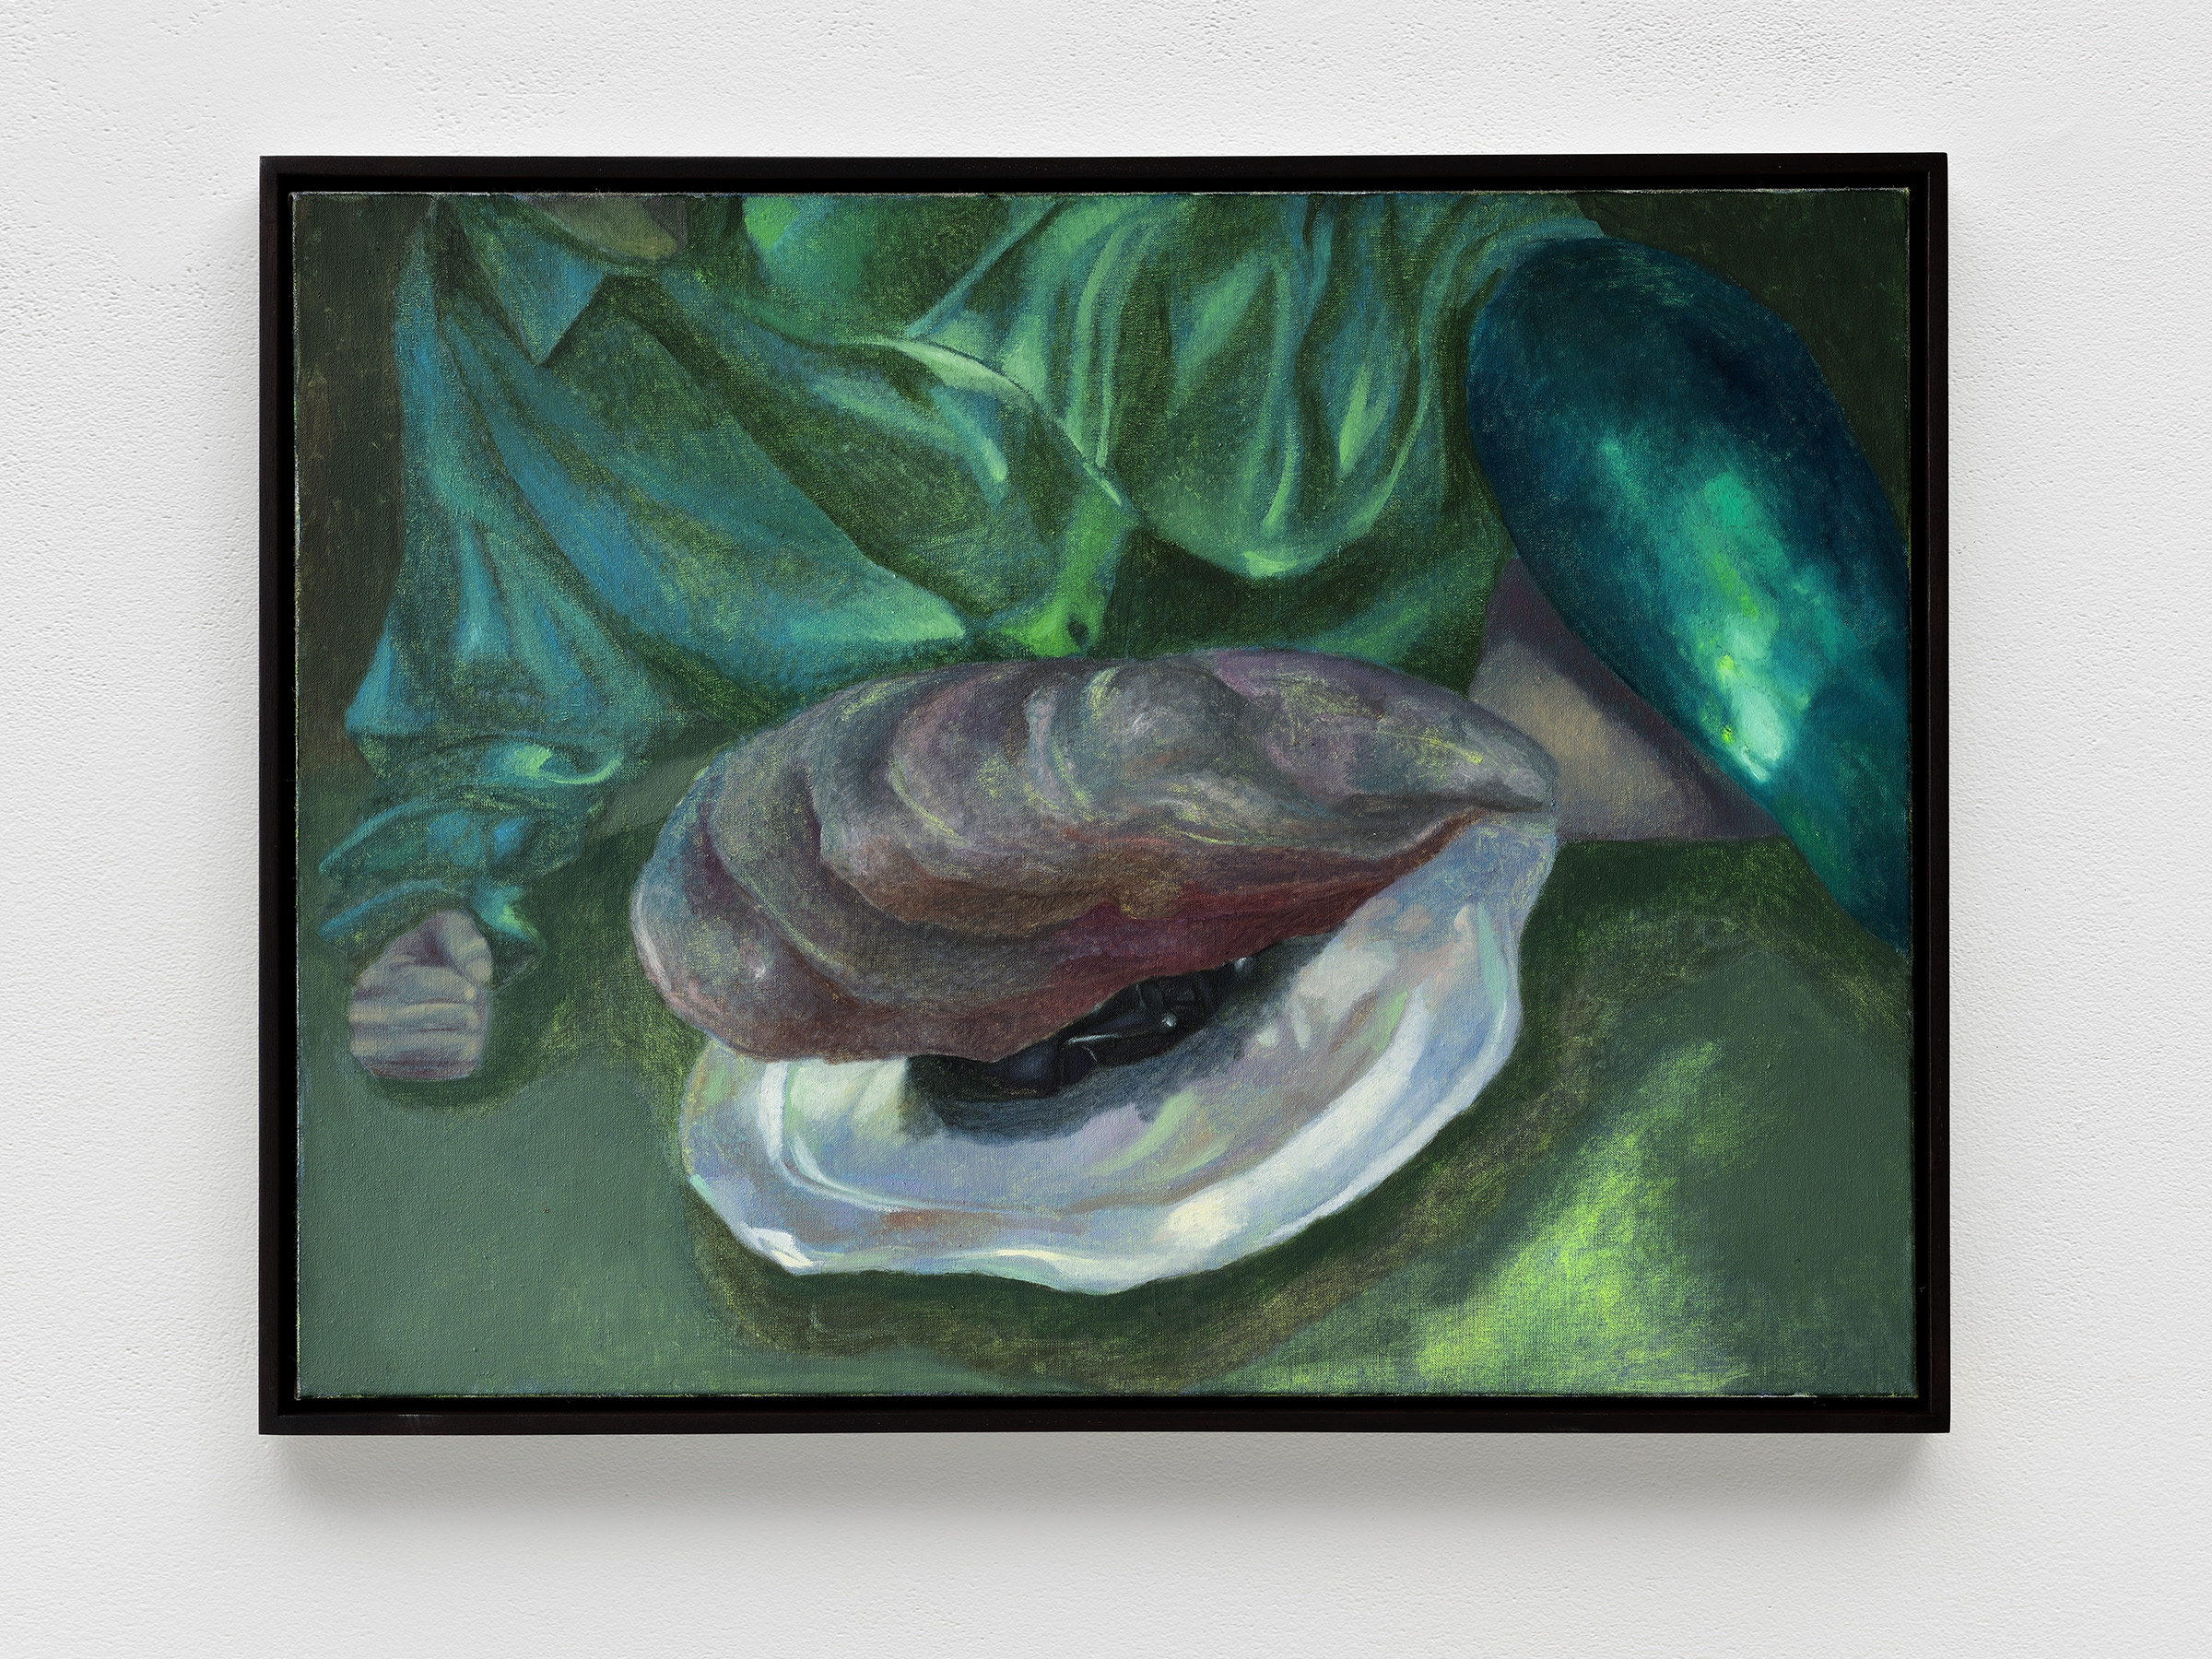 Alessandro Fogo, Birth of the myth (Oyster), 2023, oil on linen, 60 x 80 cm, 23 5/8 x 31 1/2 in.